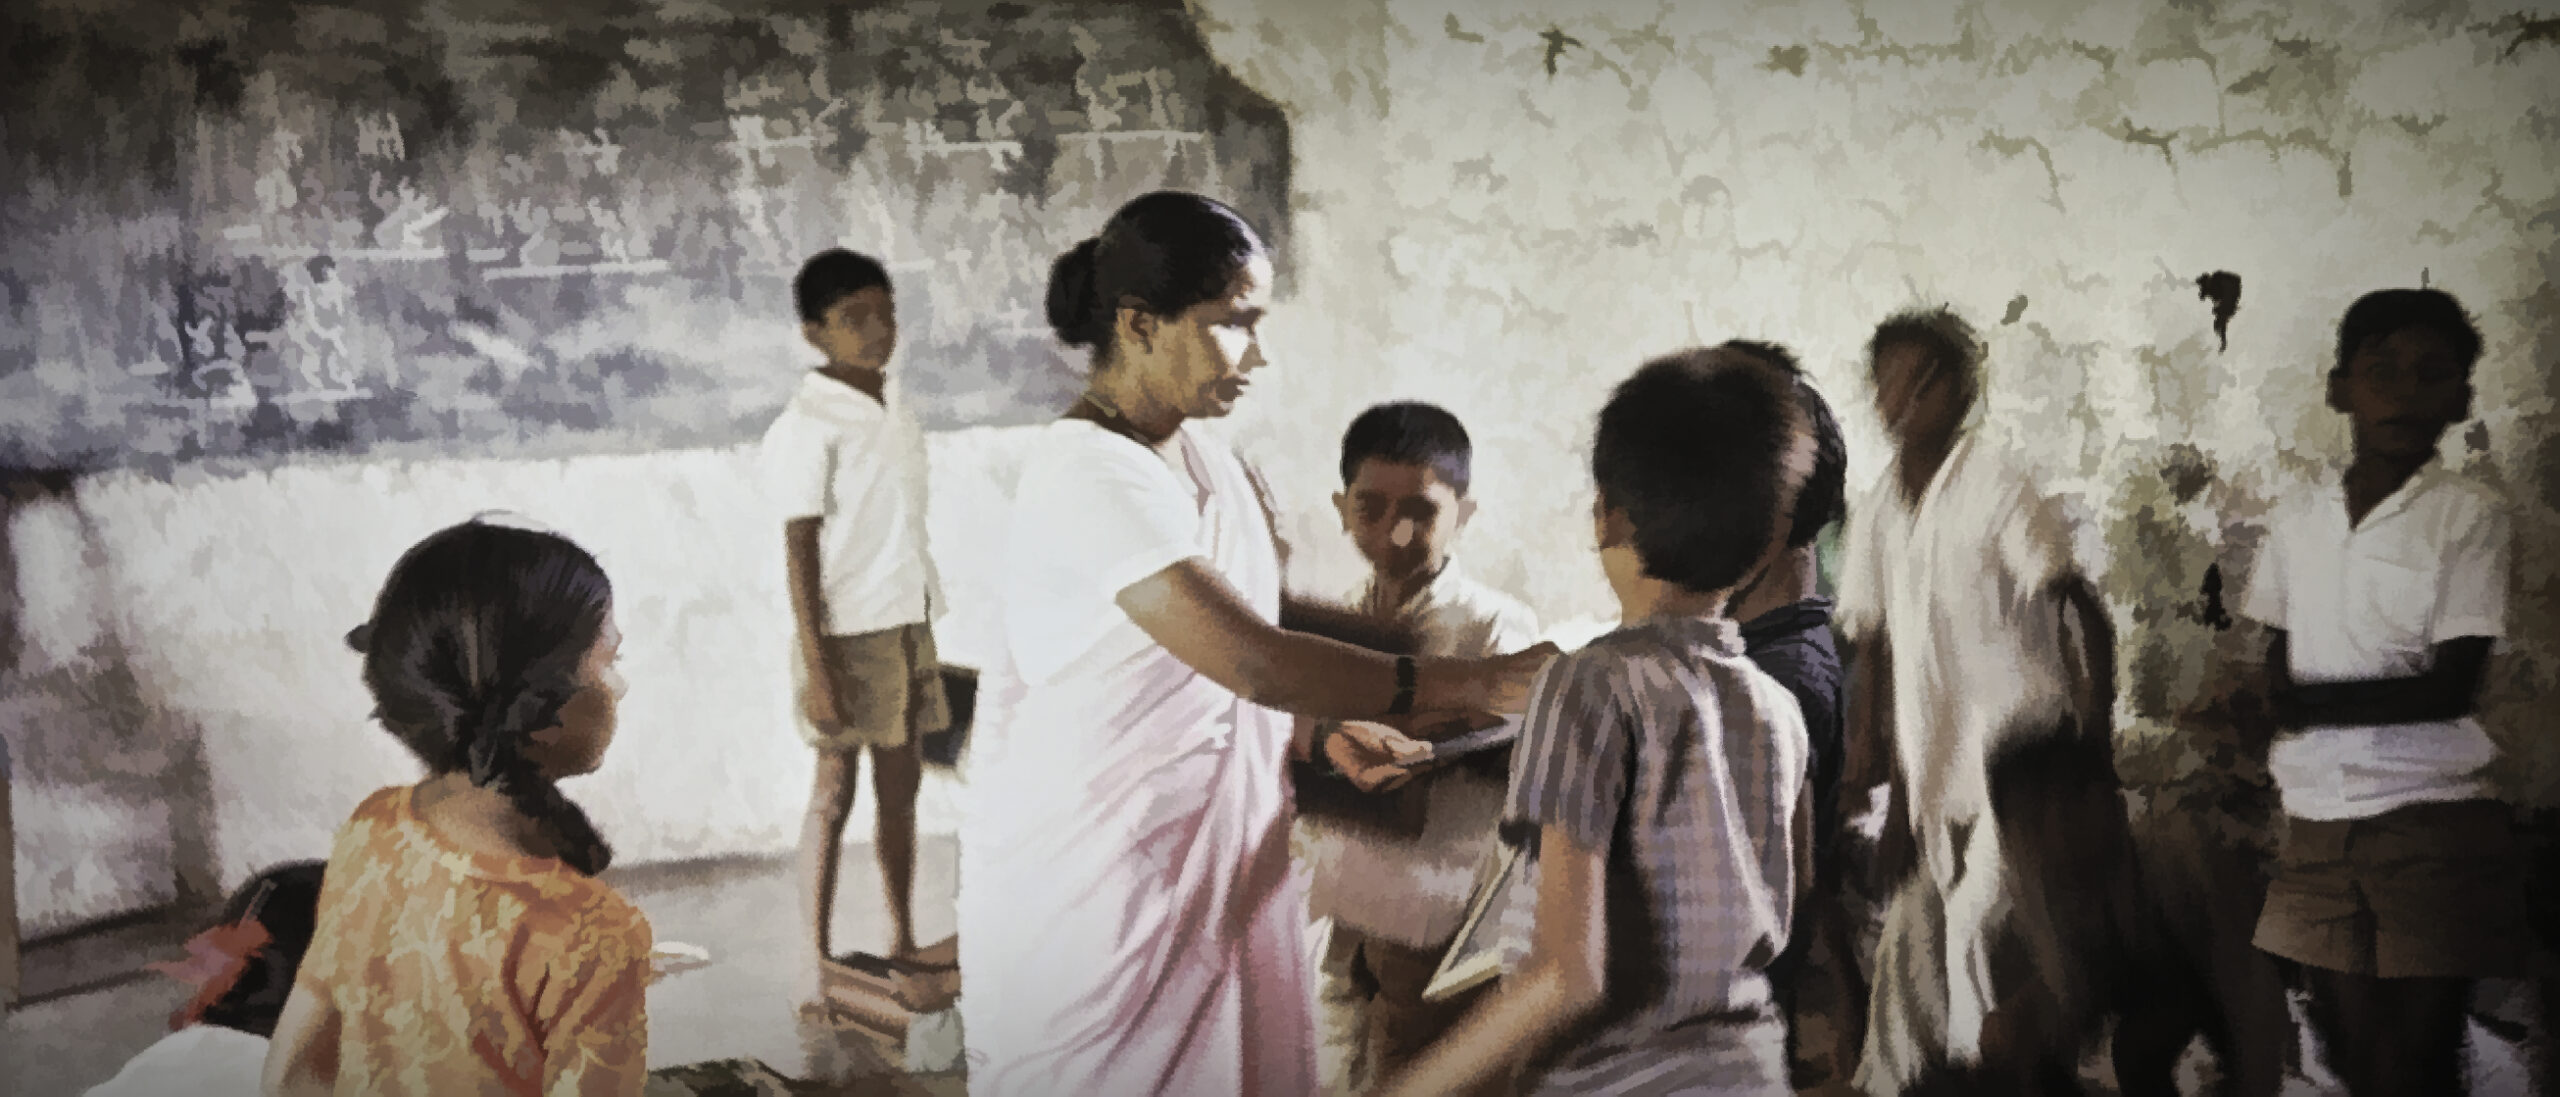 A female teacher with students in India